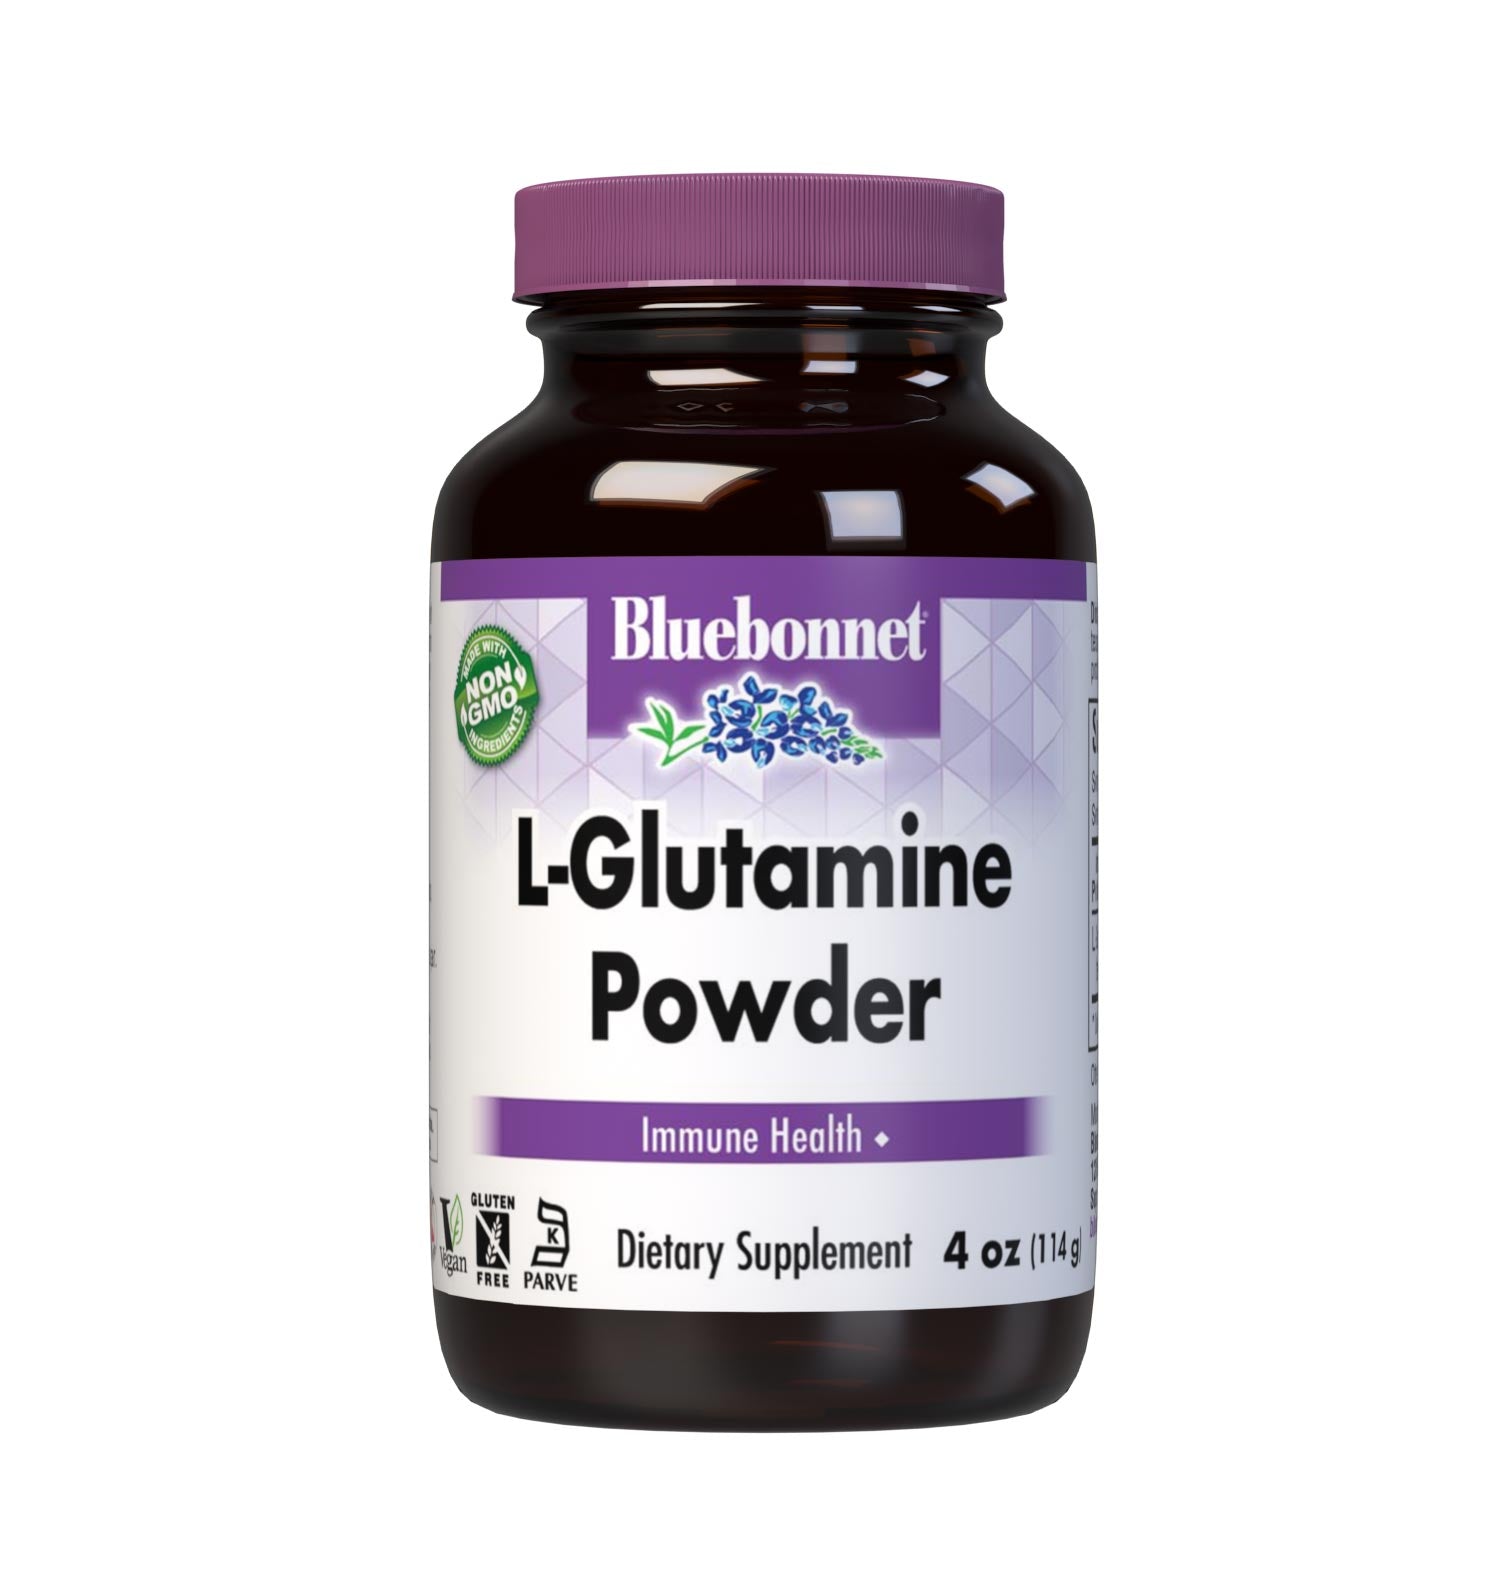 Bluebonnet’s L-Glutamine Powder 4 oz, formulated with the tree-form amino acid L-glutamine in its form from Ajinomoto to help support immune function. #size_4 oz